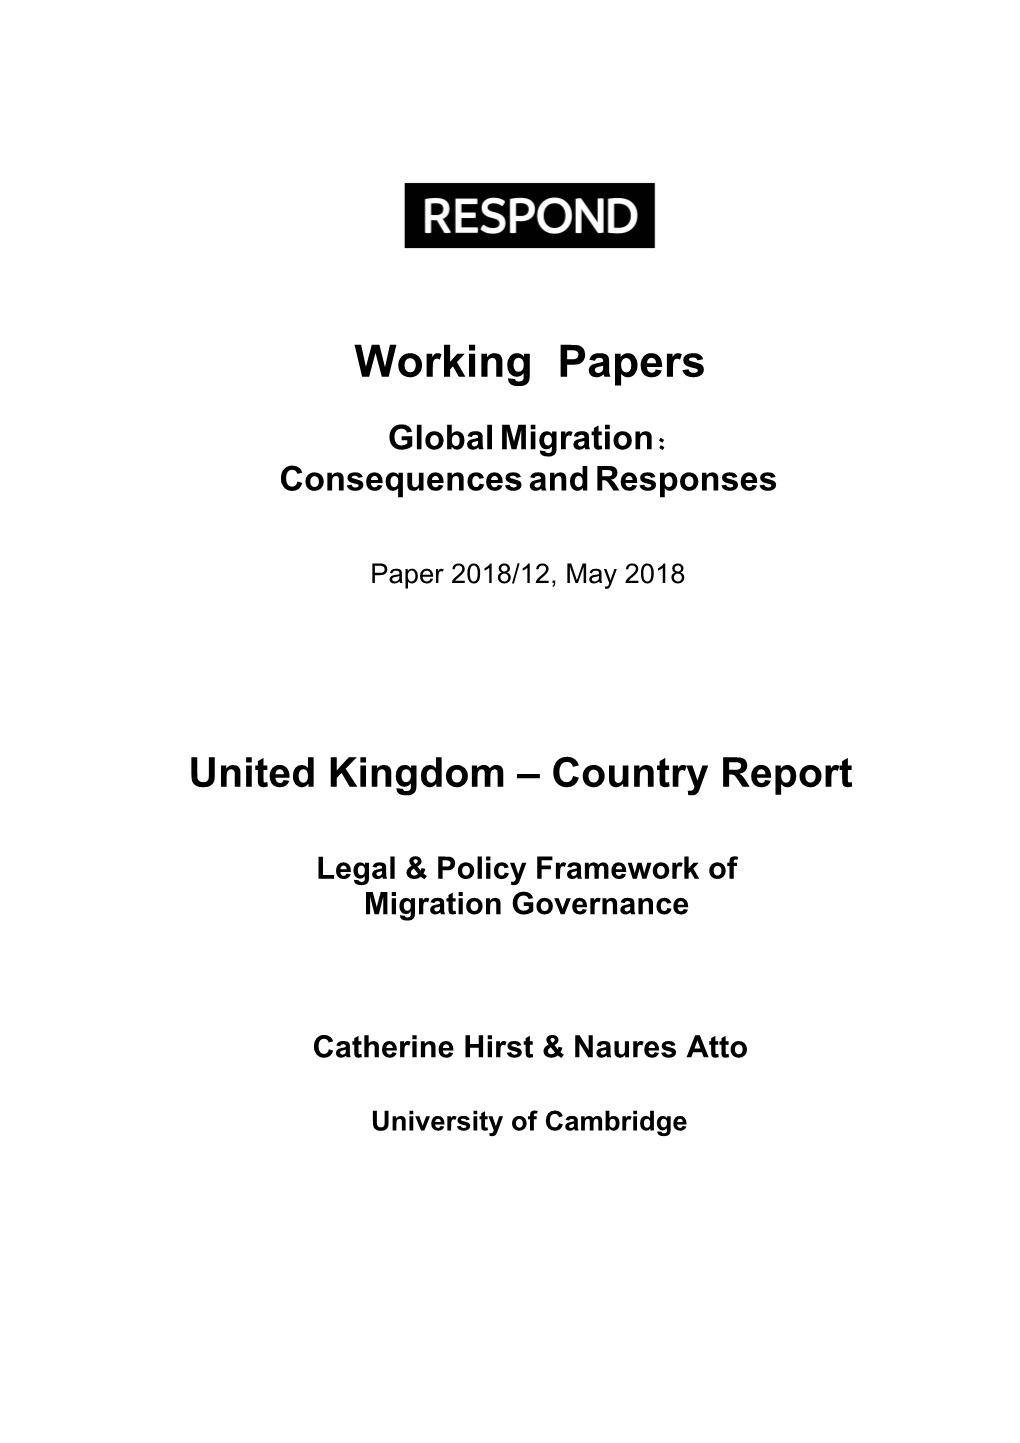 11 UK Country Report (Reformatted)